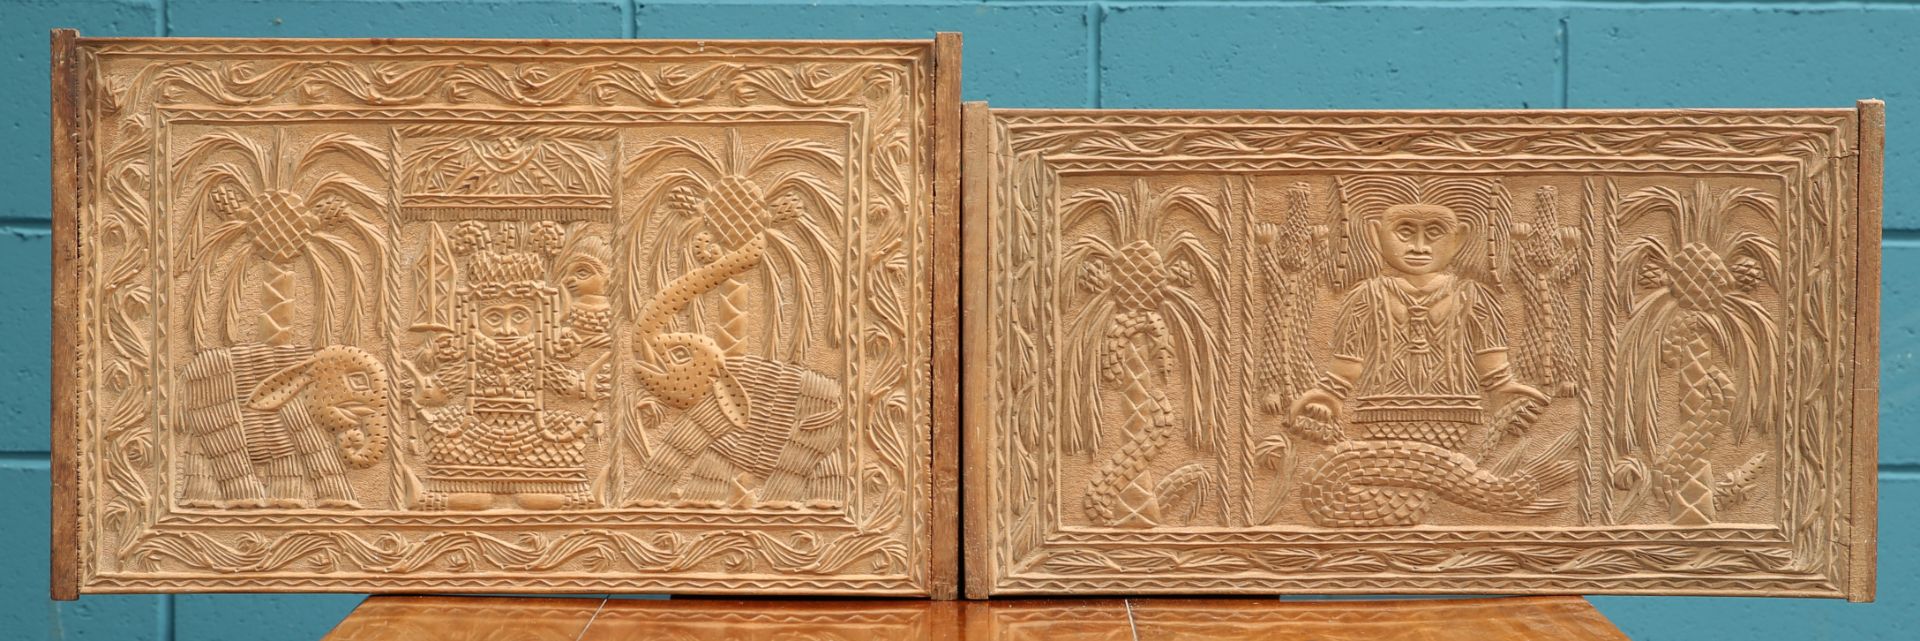 TWO CARVED WOODEN PANELS